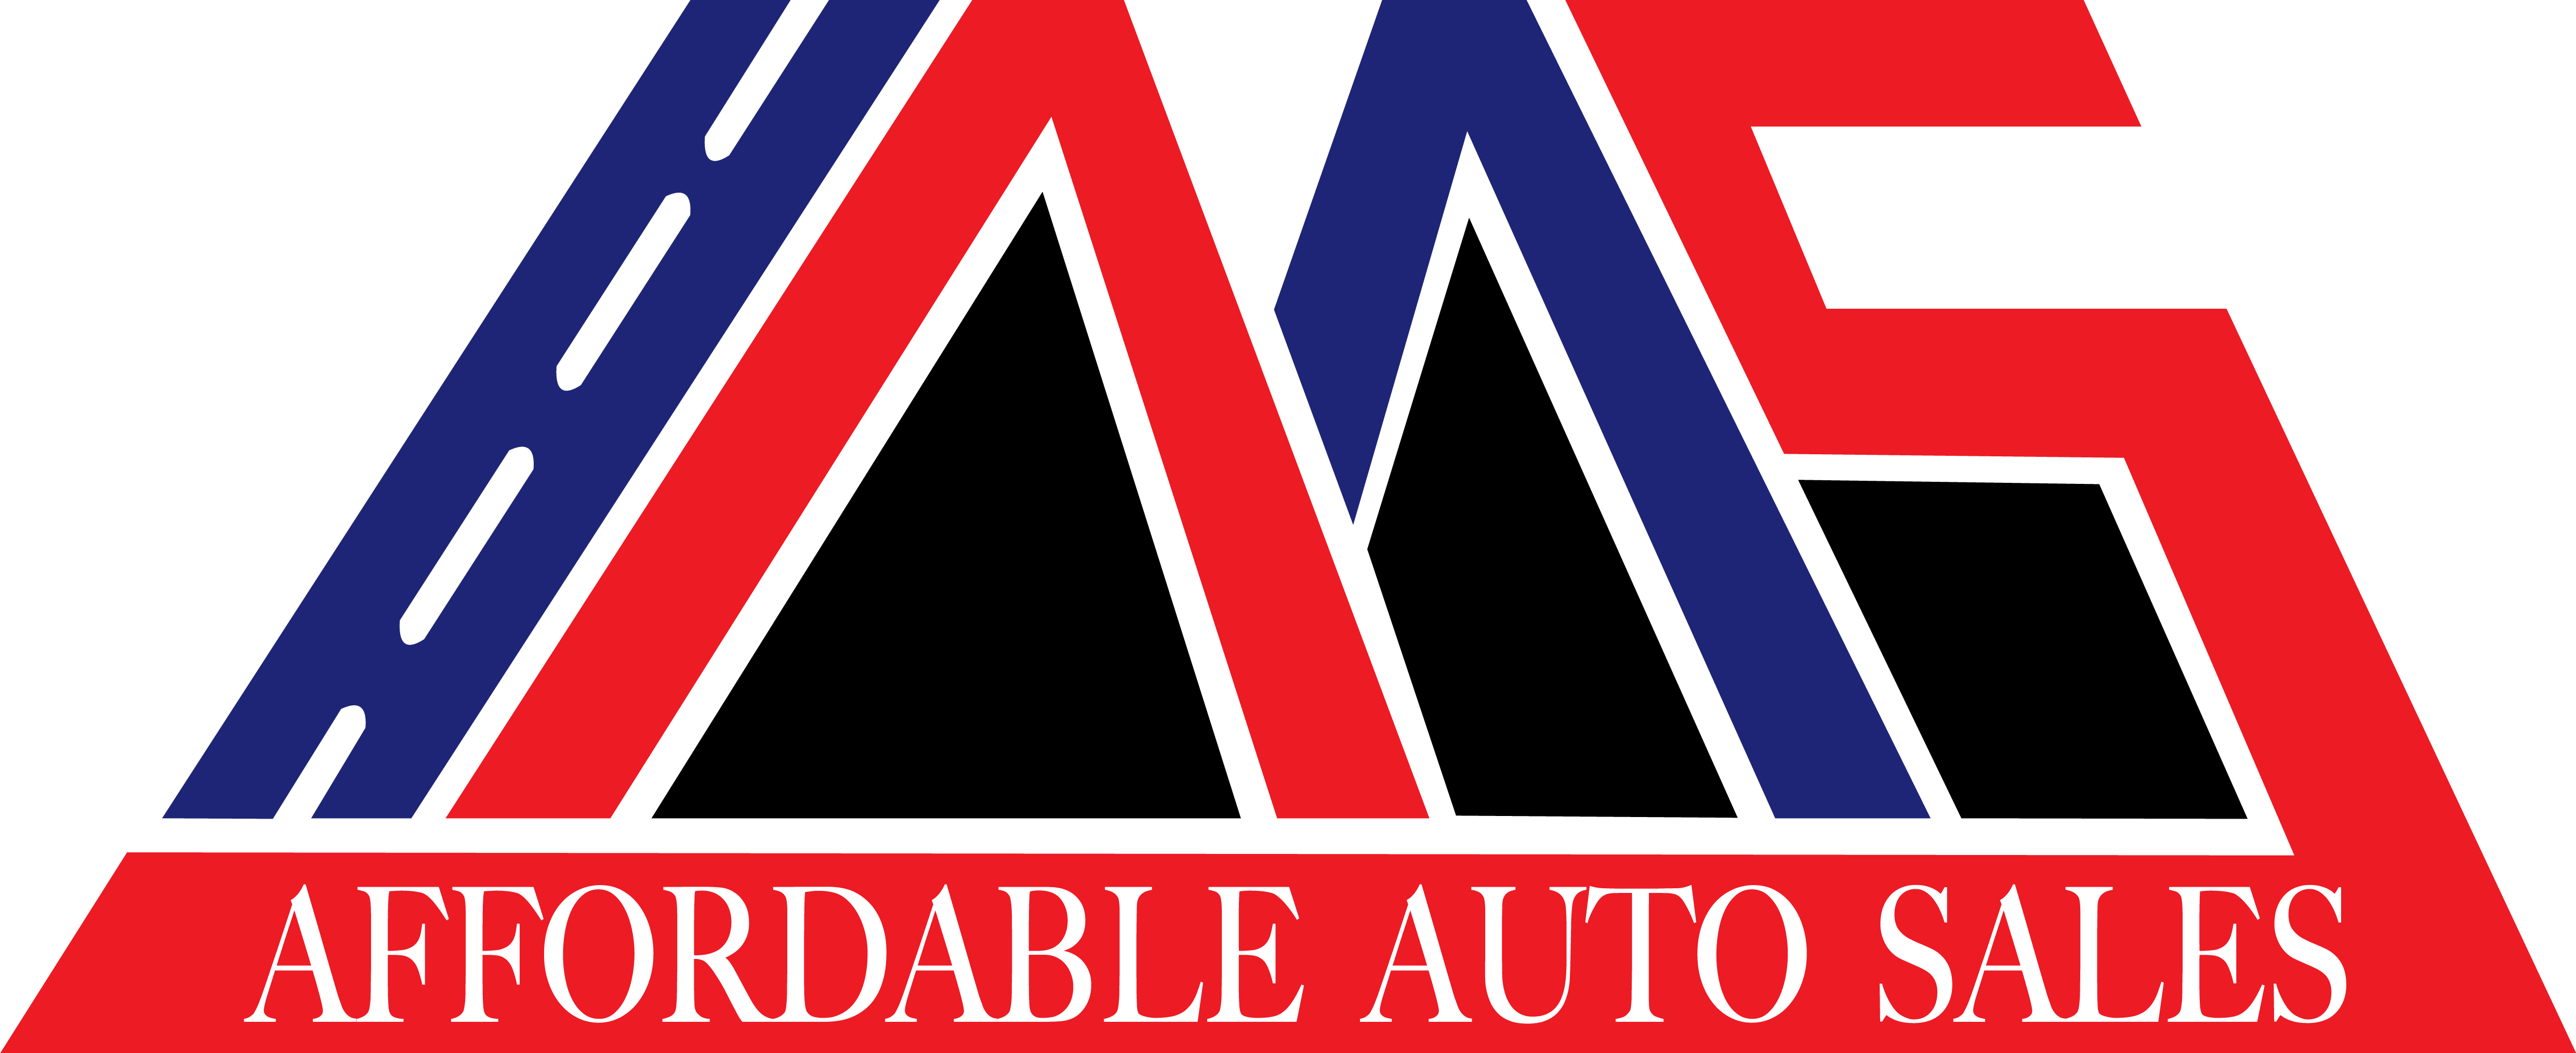 Affordable Auto Sales | Truro & Colchester Chamber Of Commerce